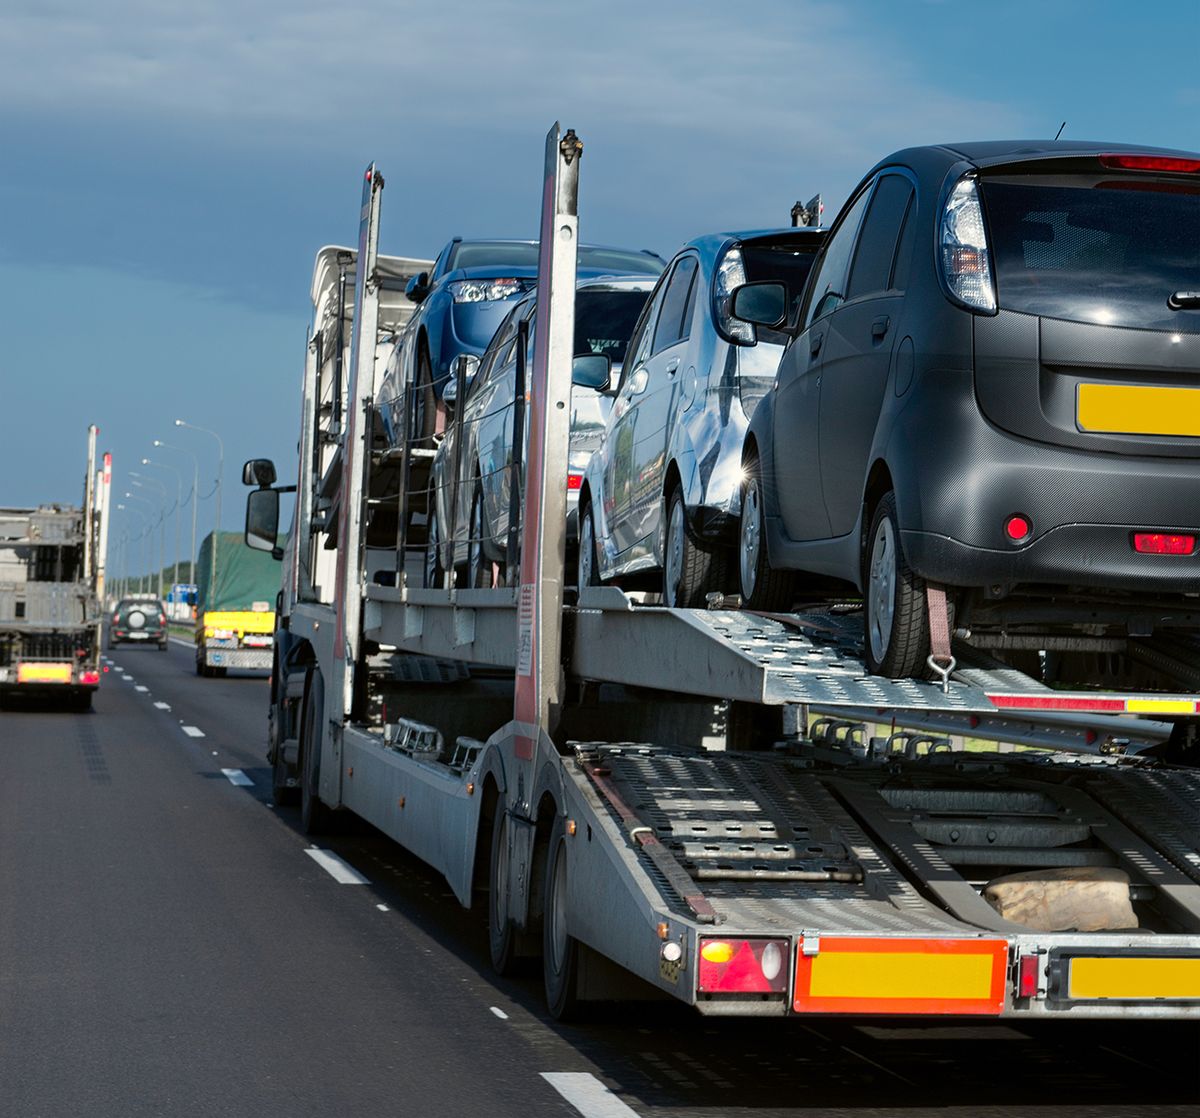 The,Trailer,Transports,Cars,On,The,Highway The trailer transports cars on the highway